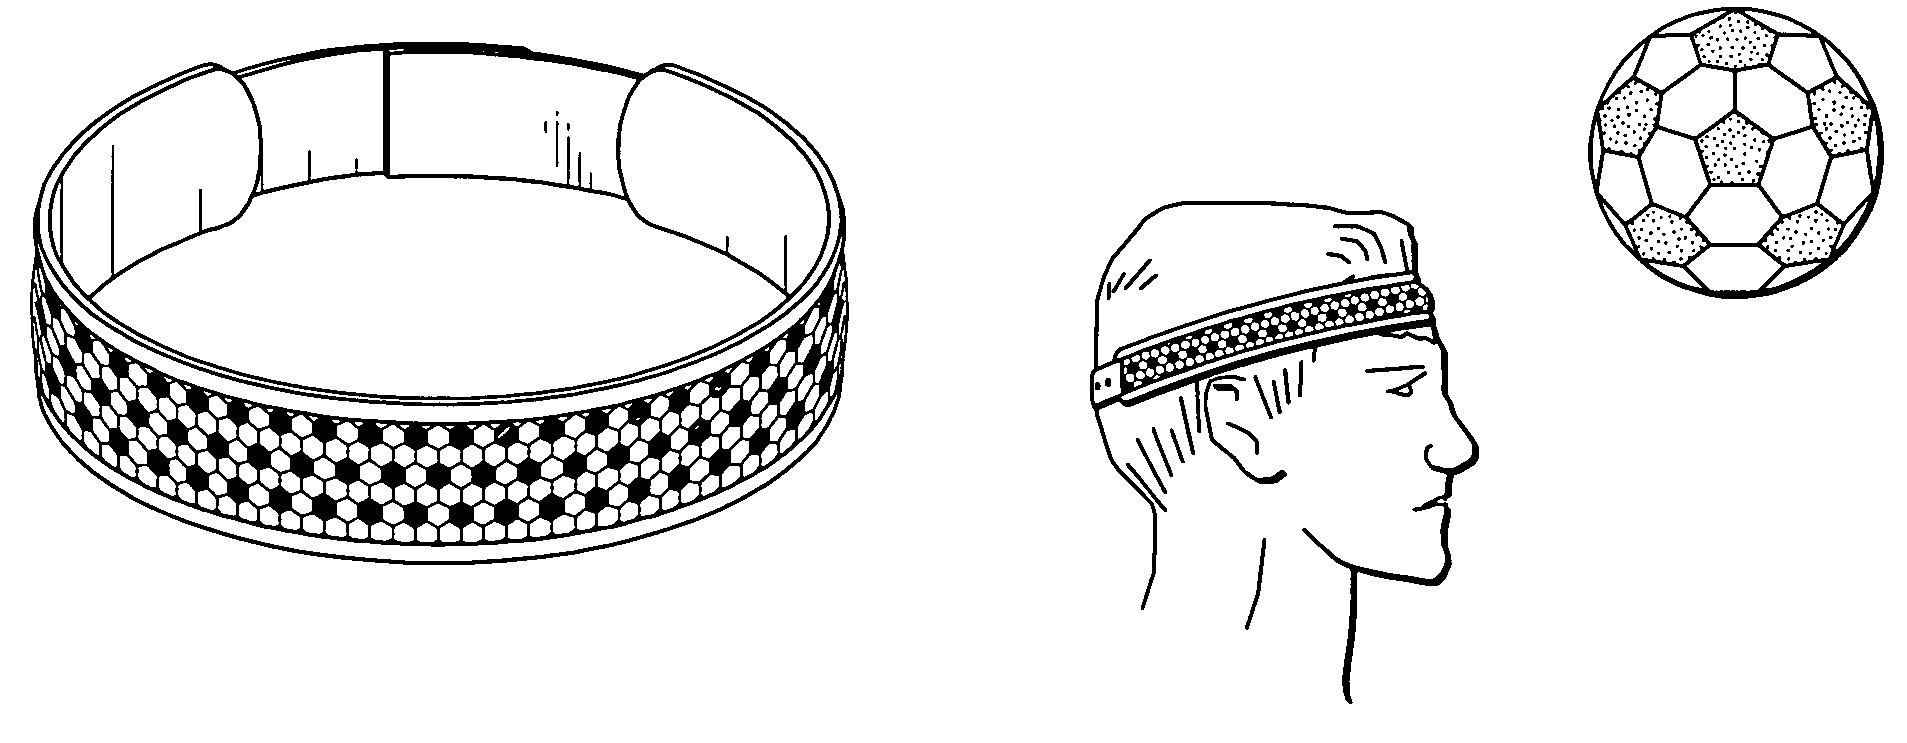 Sports headband to reduce or prevent head injury